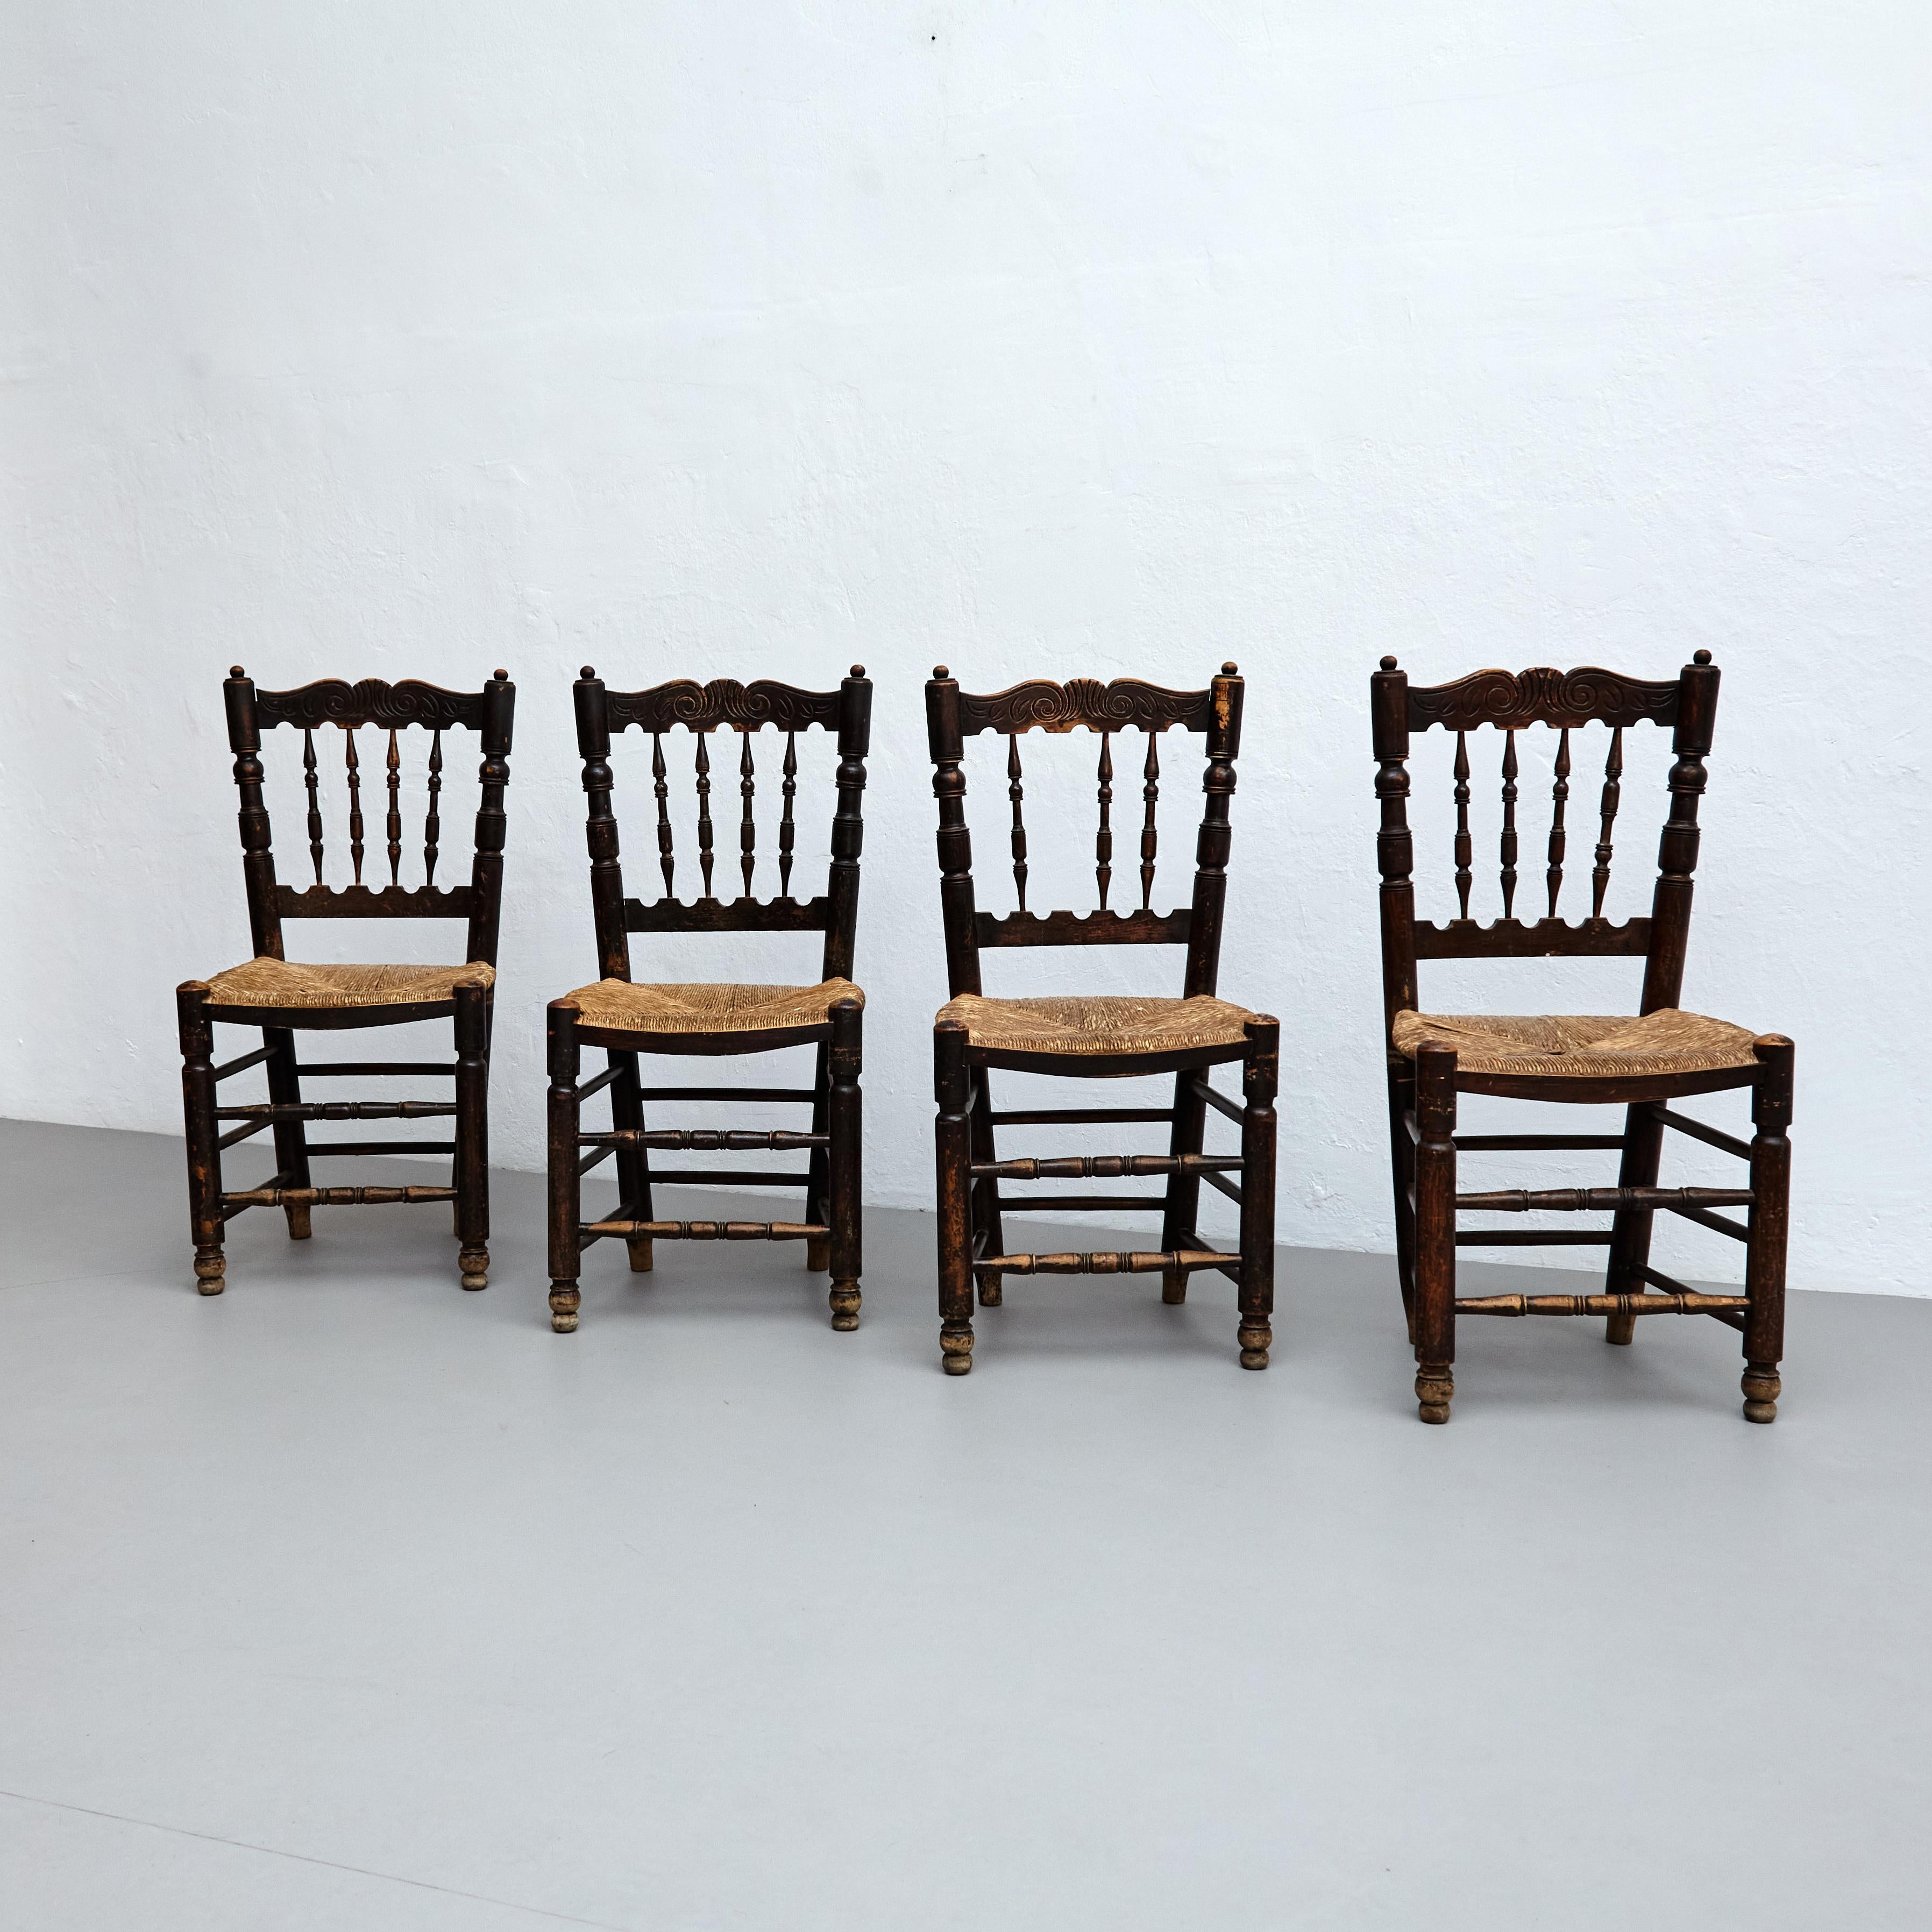 Set of four rustic wood French chairs.

Manufactured in French, circa 1950.

In original condition with minor wear consistent of age and use, preserving a beautiful patina.

Materials: 
Wood, rattan

Dimensions: 
D 38.5 cm x W 42.2 cm x H